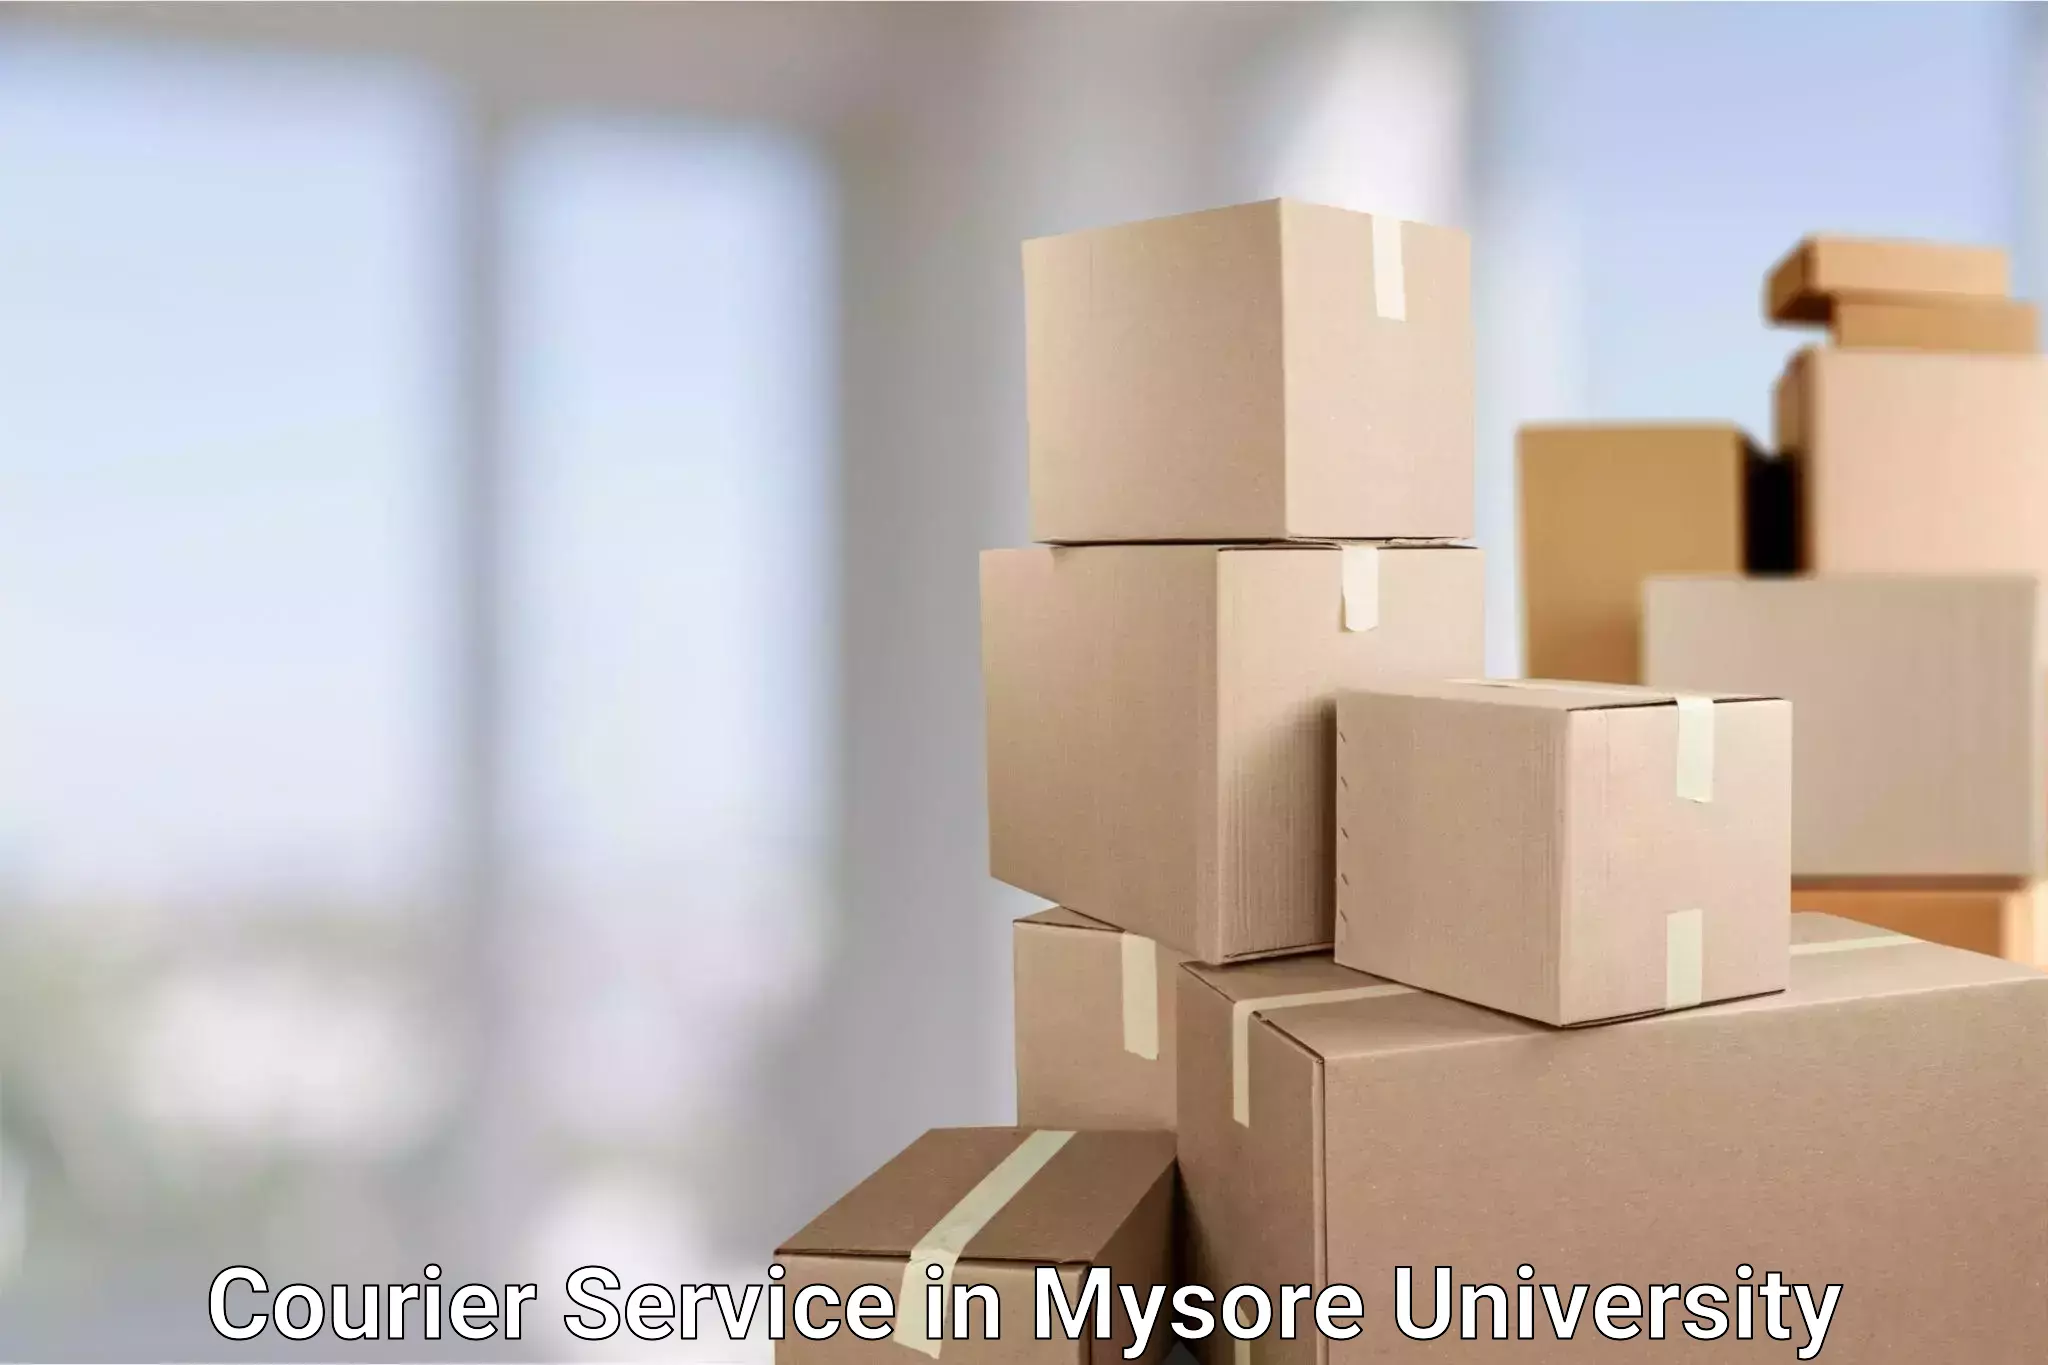 Express delivery capabilities in Mysore University